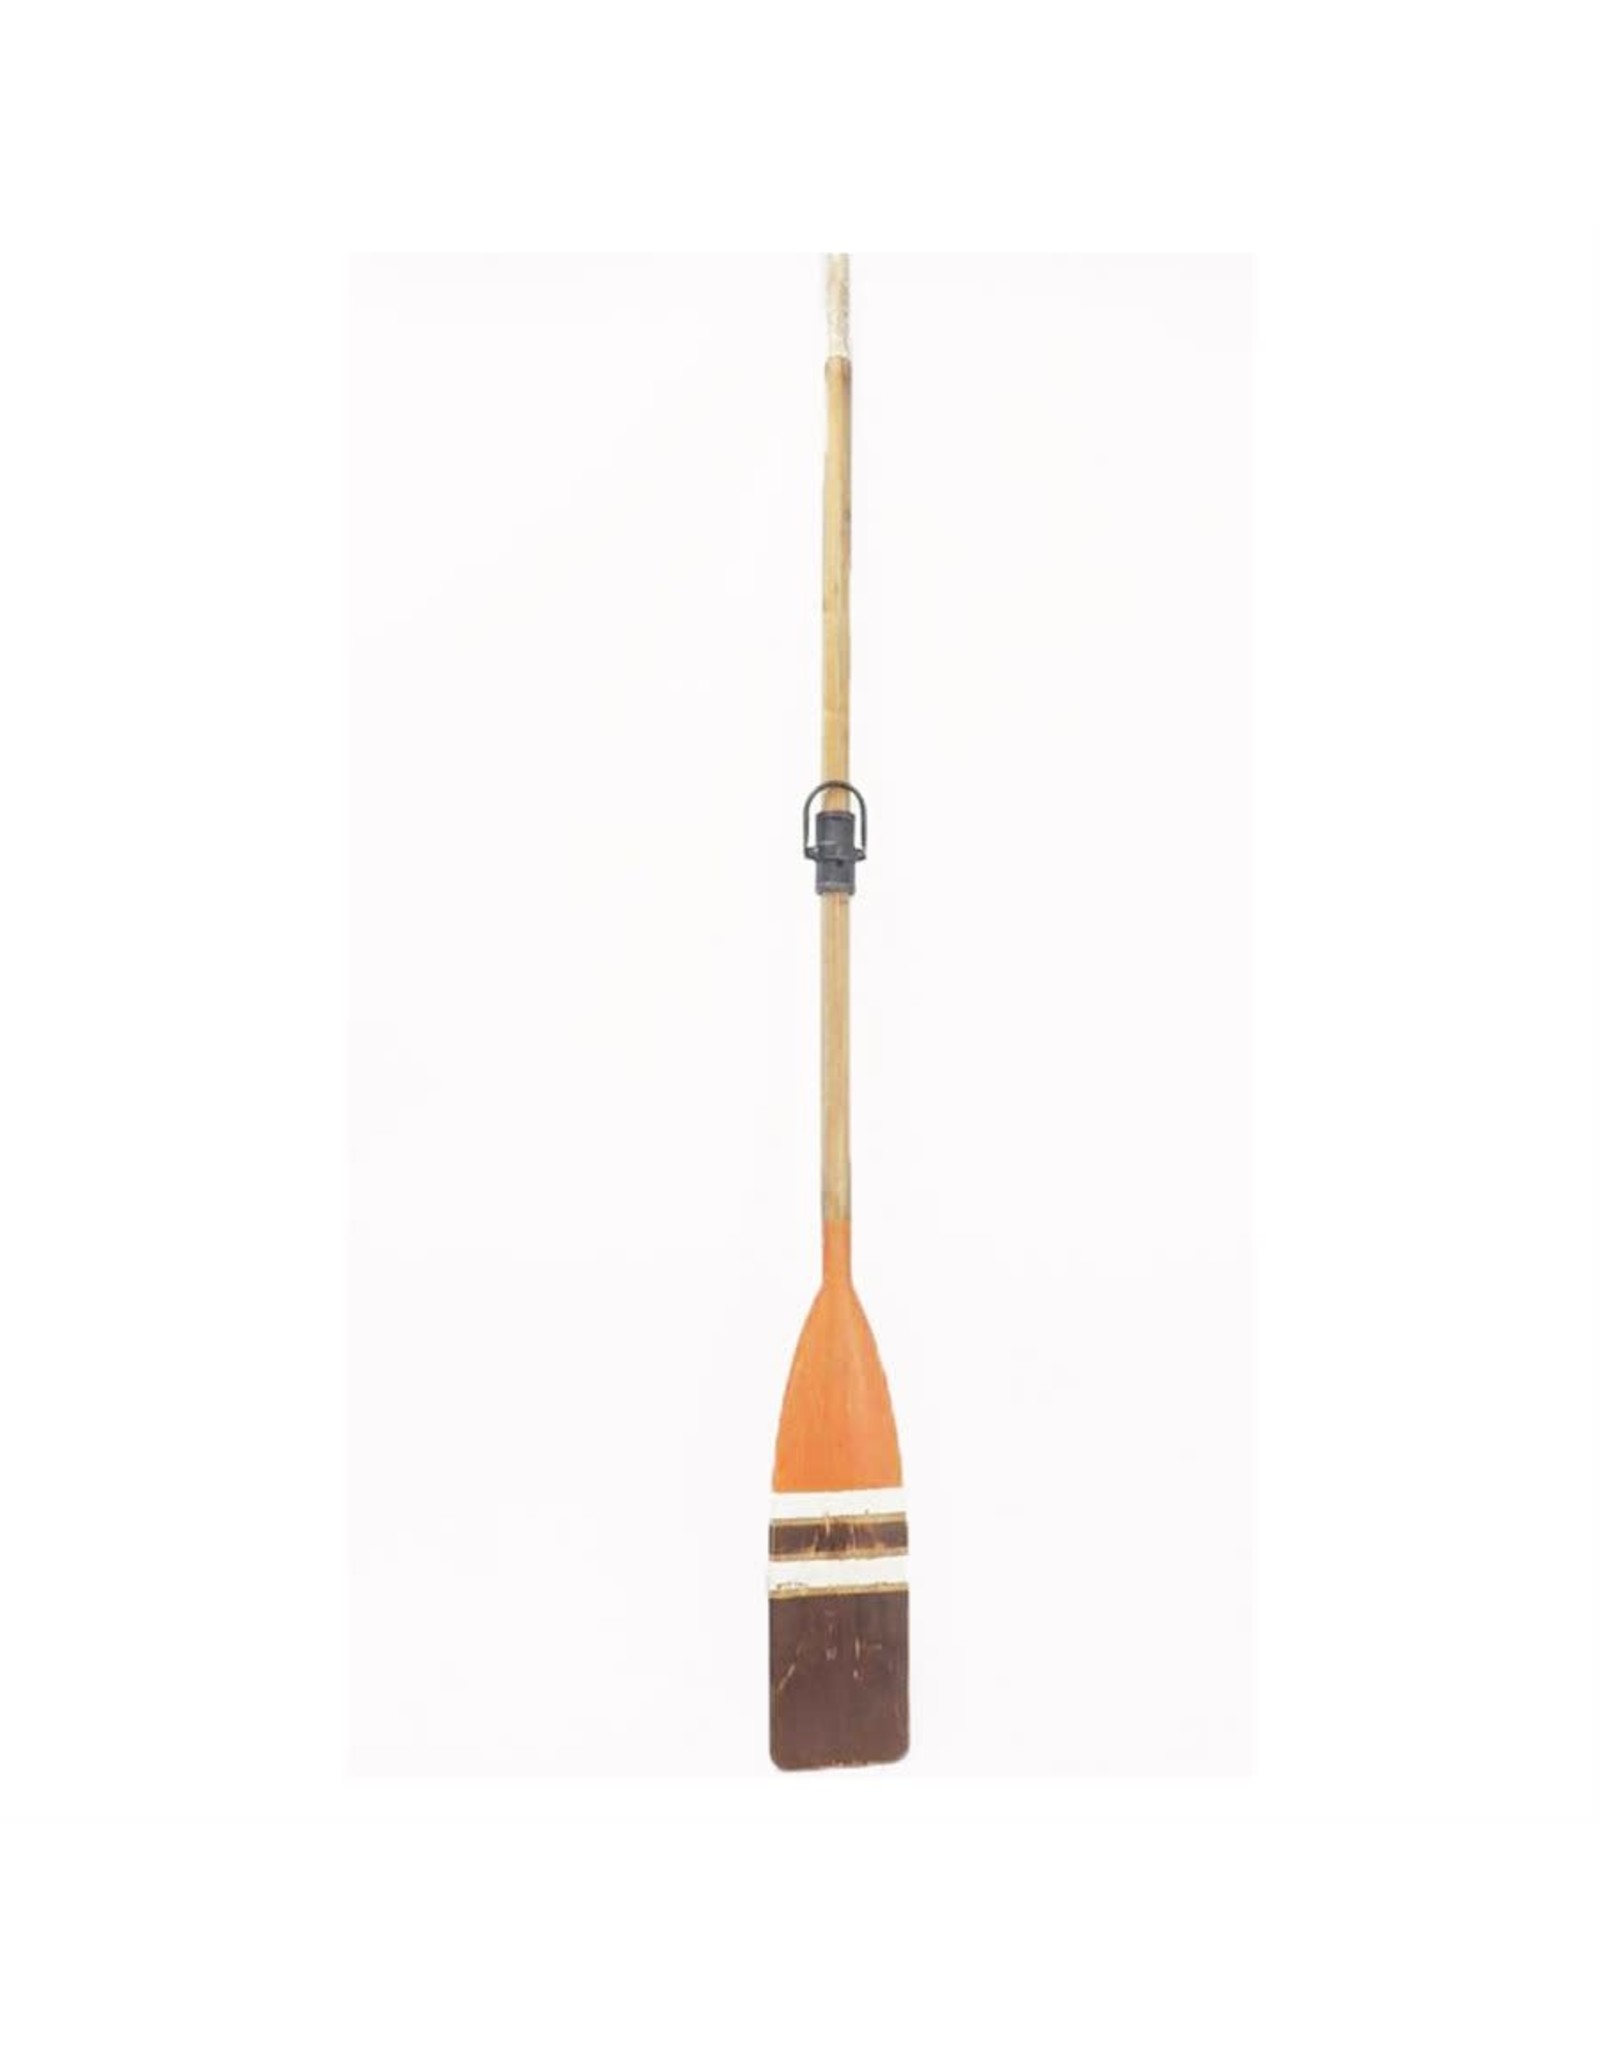 Decorative Wooden Rowing Paddle